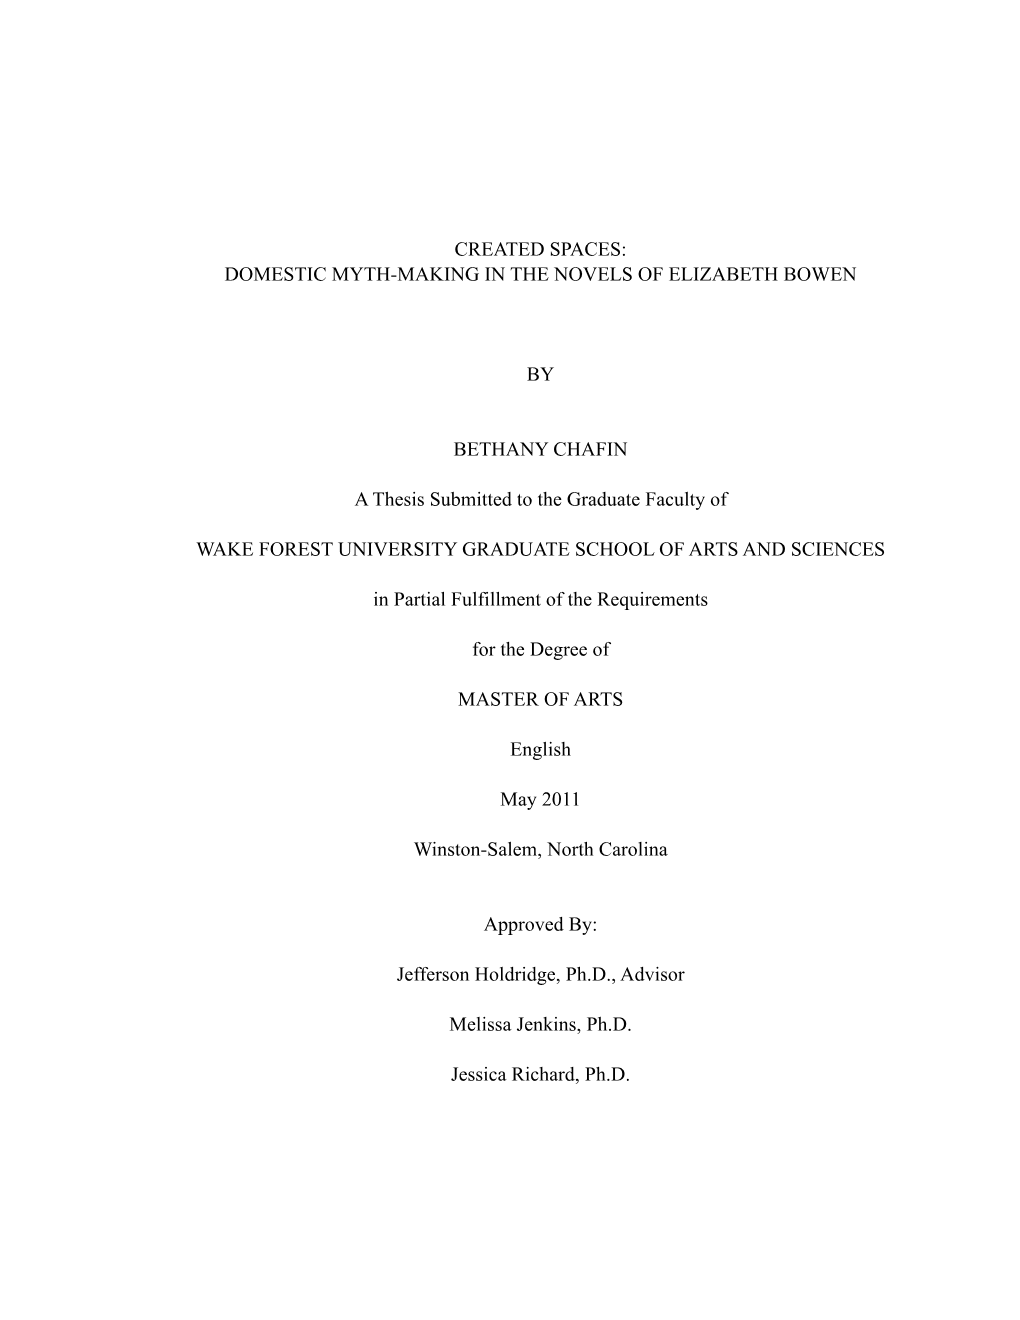 CREATED SPACES: DOMESTIC MYTH-MAKING in the NOVELS of ELIZABETH BOWEN by BETHANY CHAFIN a Thesis Submitted to the Graduate Facul